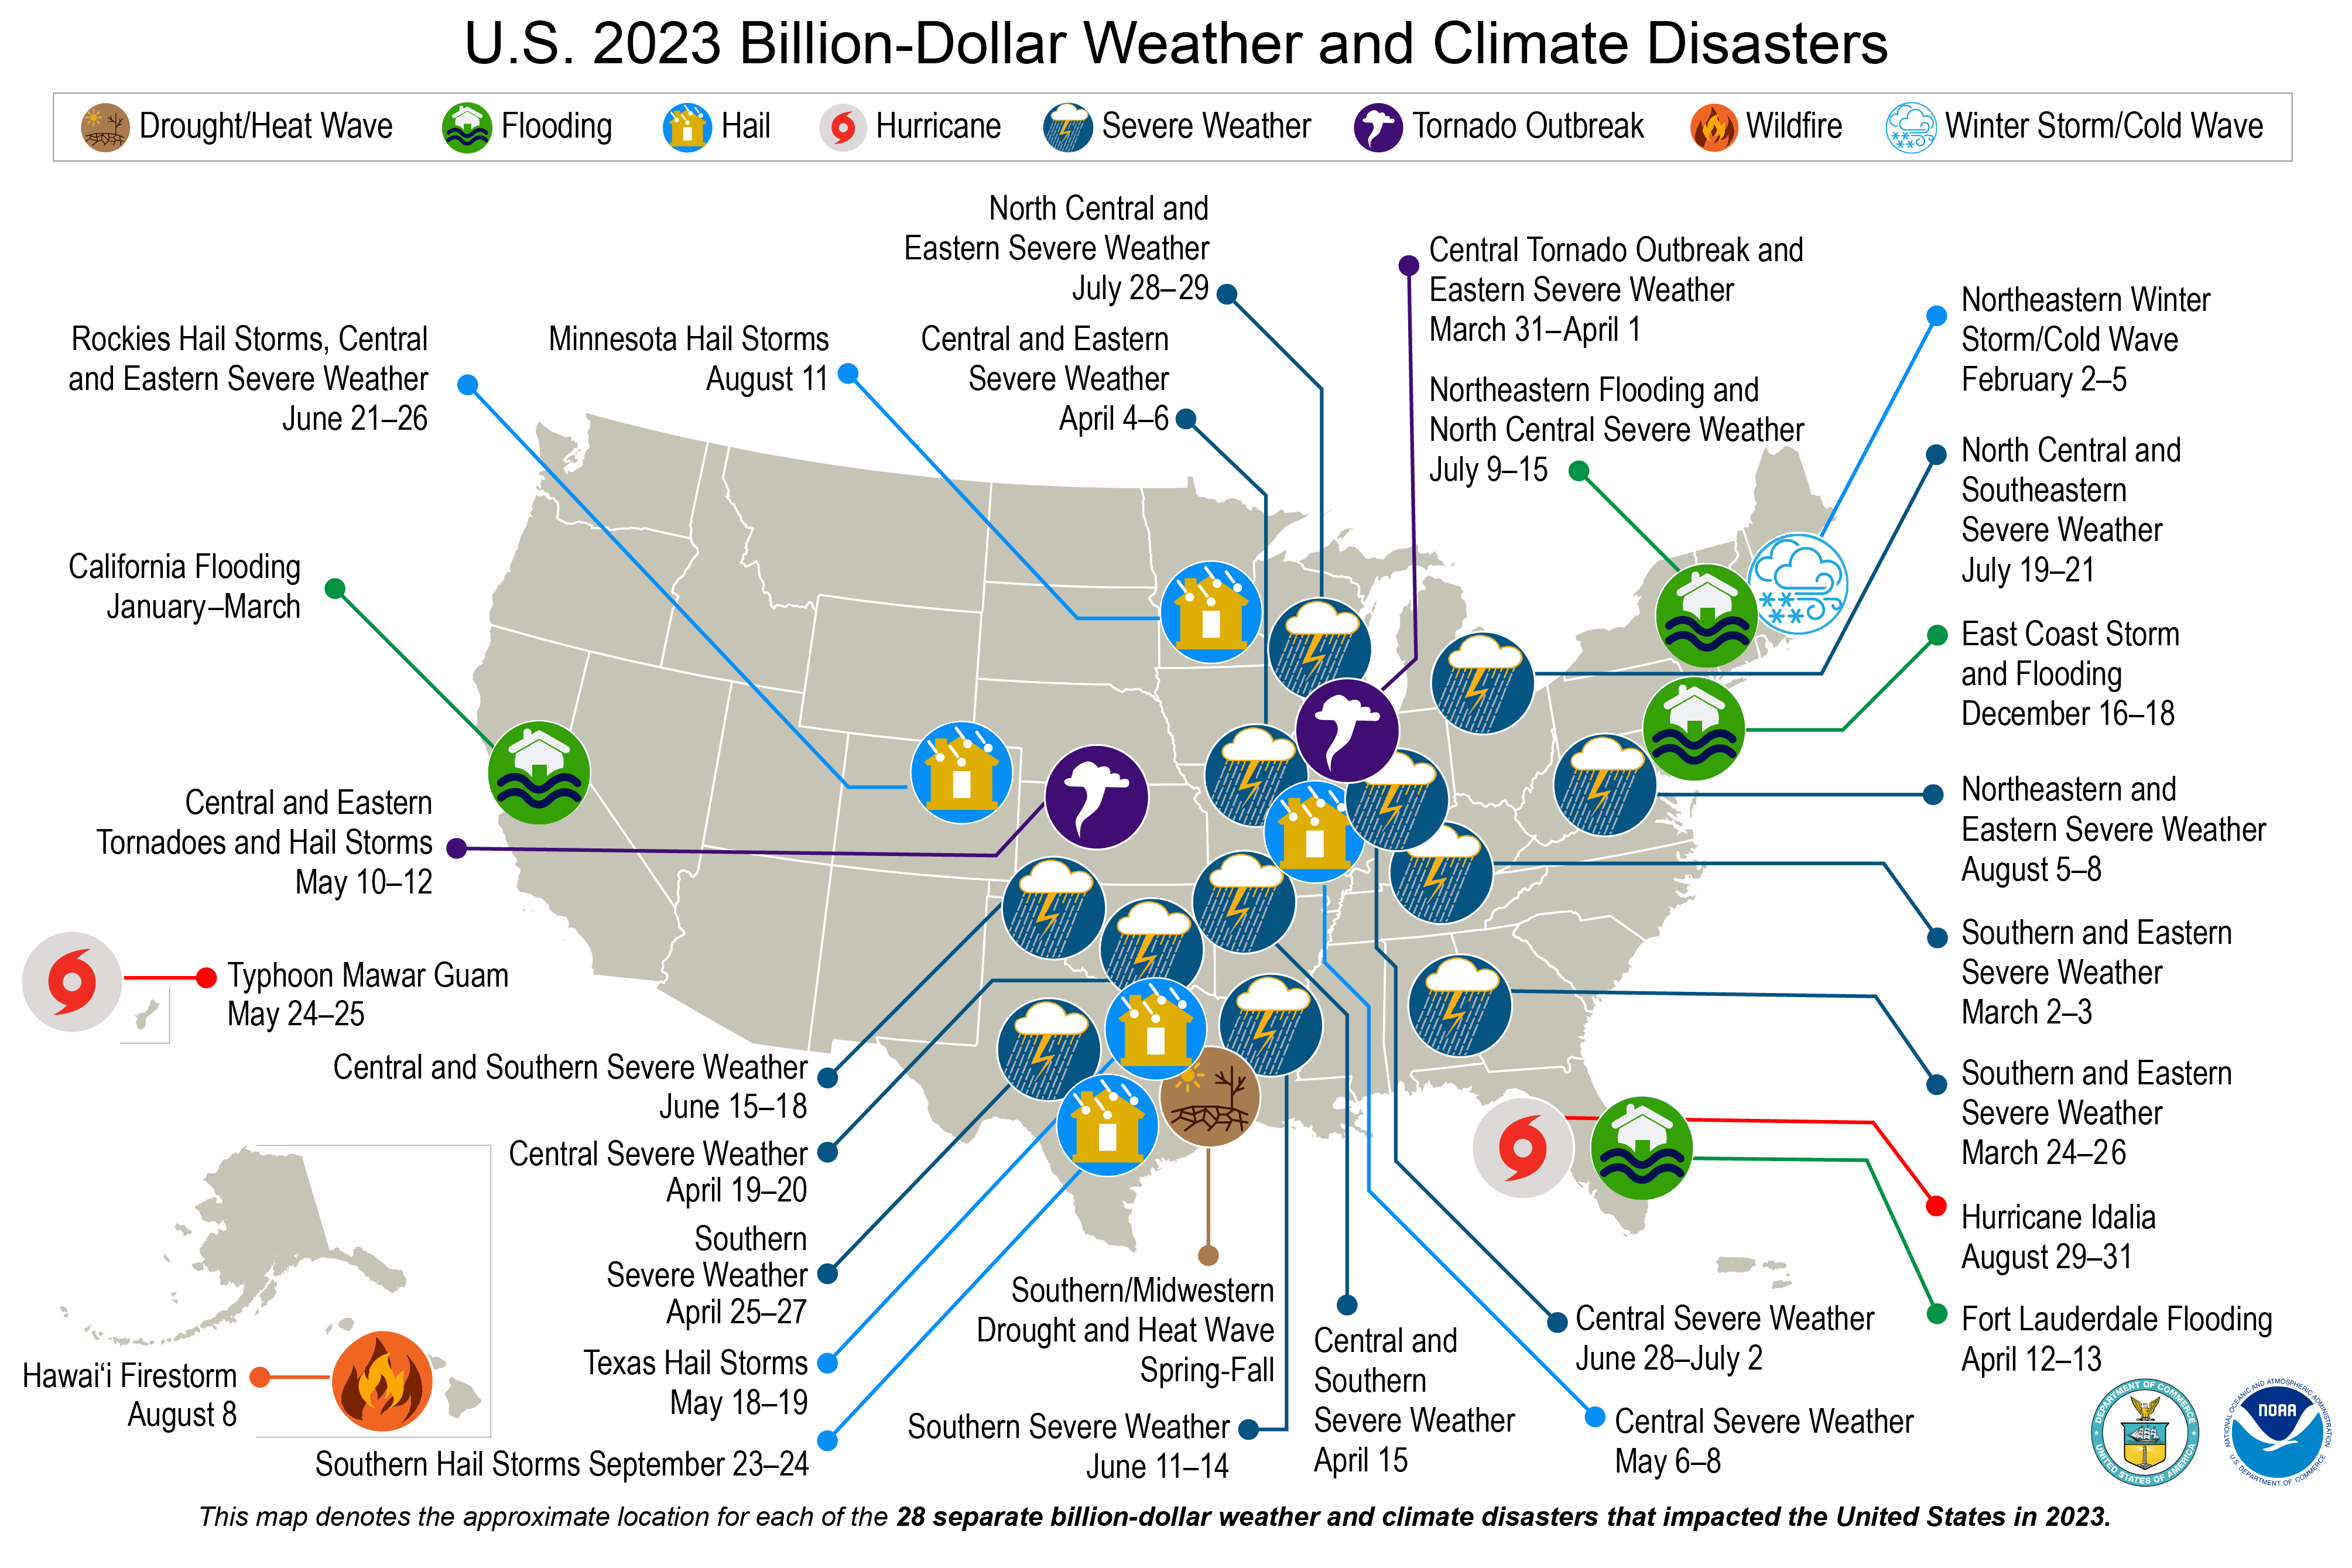 An infographic map showing the billion-dollar weather and climate disasters in 2023.